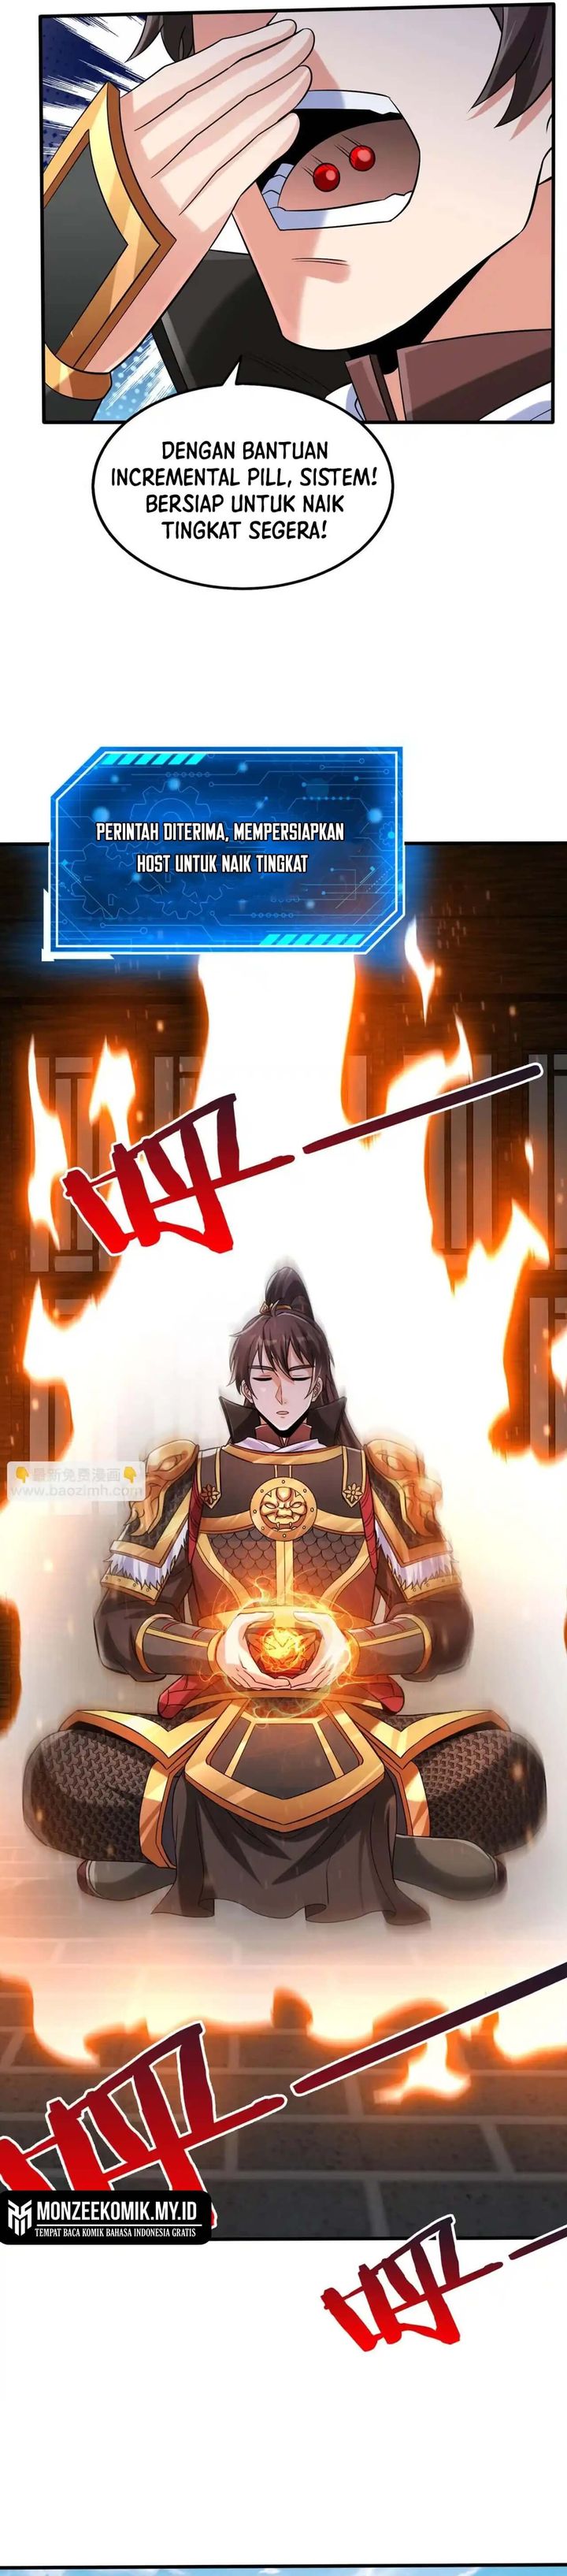 The Son Of The First Emperor Kills Enemies And Becomes A God Chapter 78